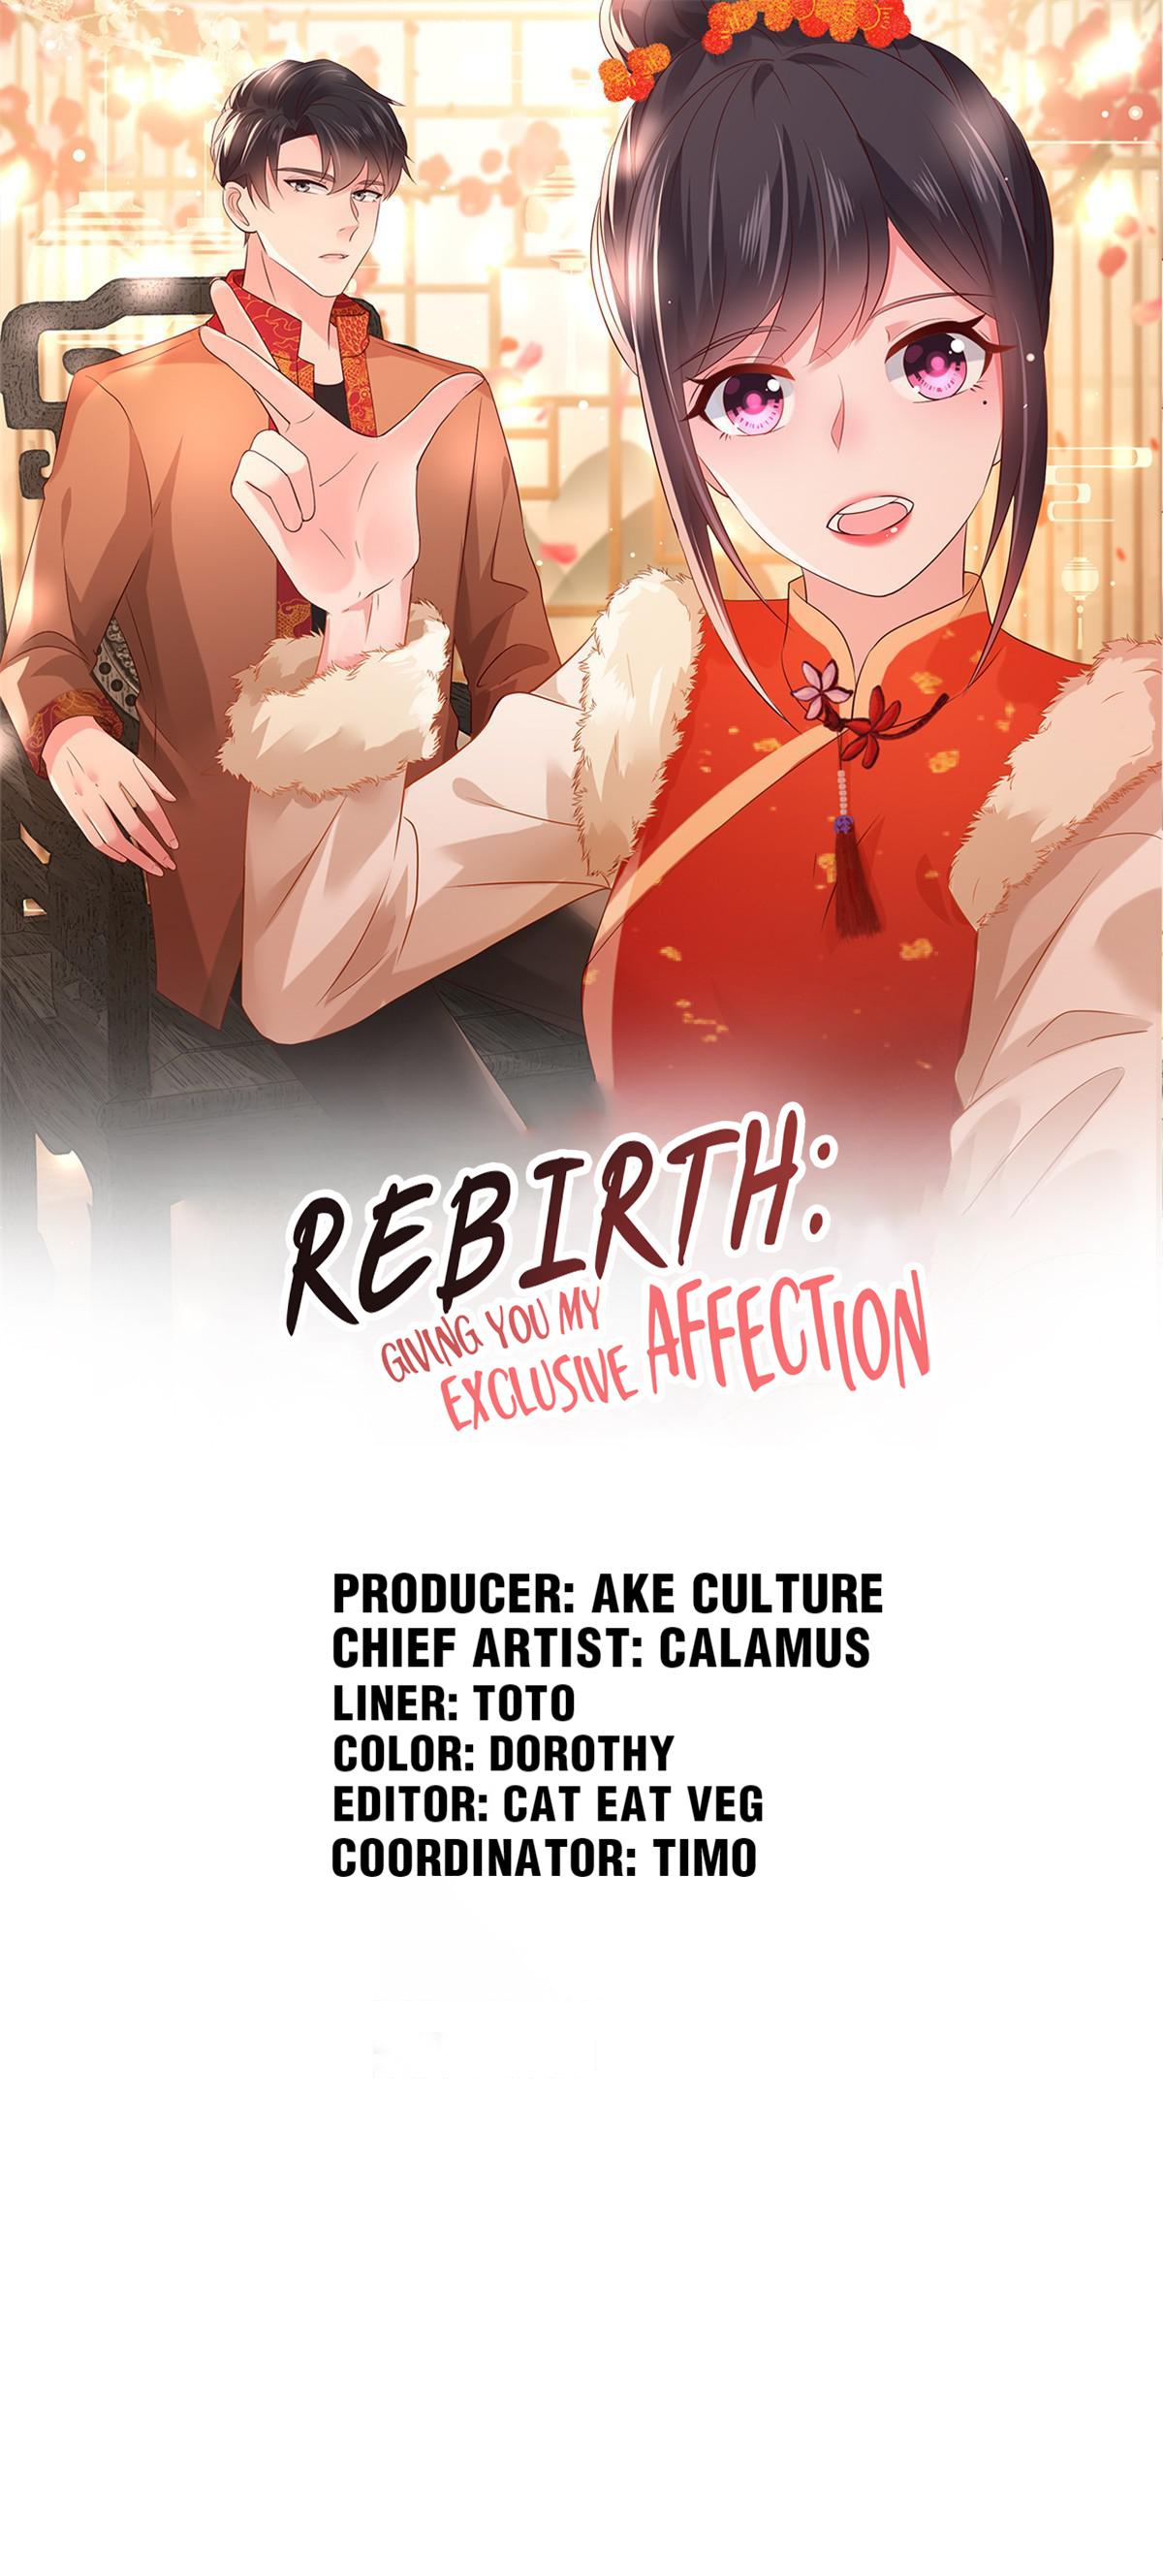 Rebirth: Giving You My Exclusive Affection 51.1 The Enigmatic Fu Family